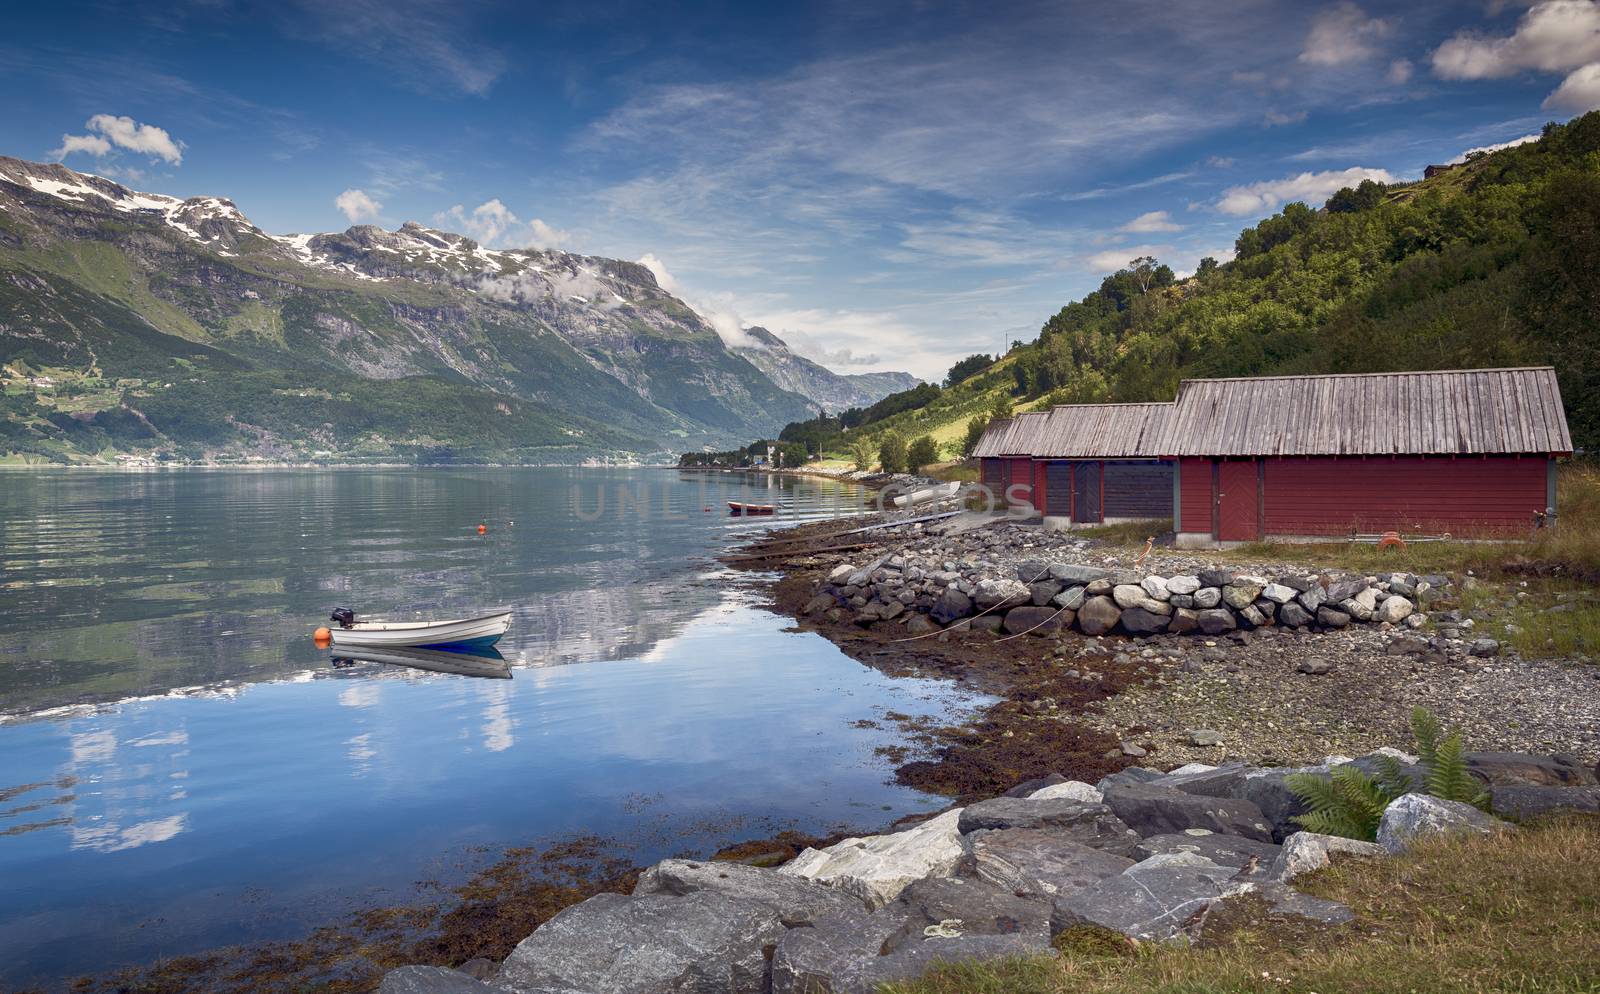 red houses and a boat in the fjord in norway by compuinfoto